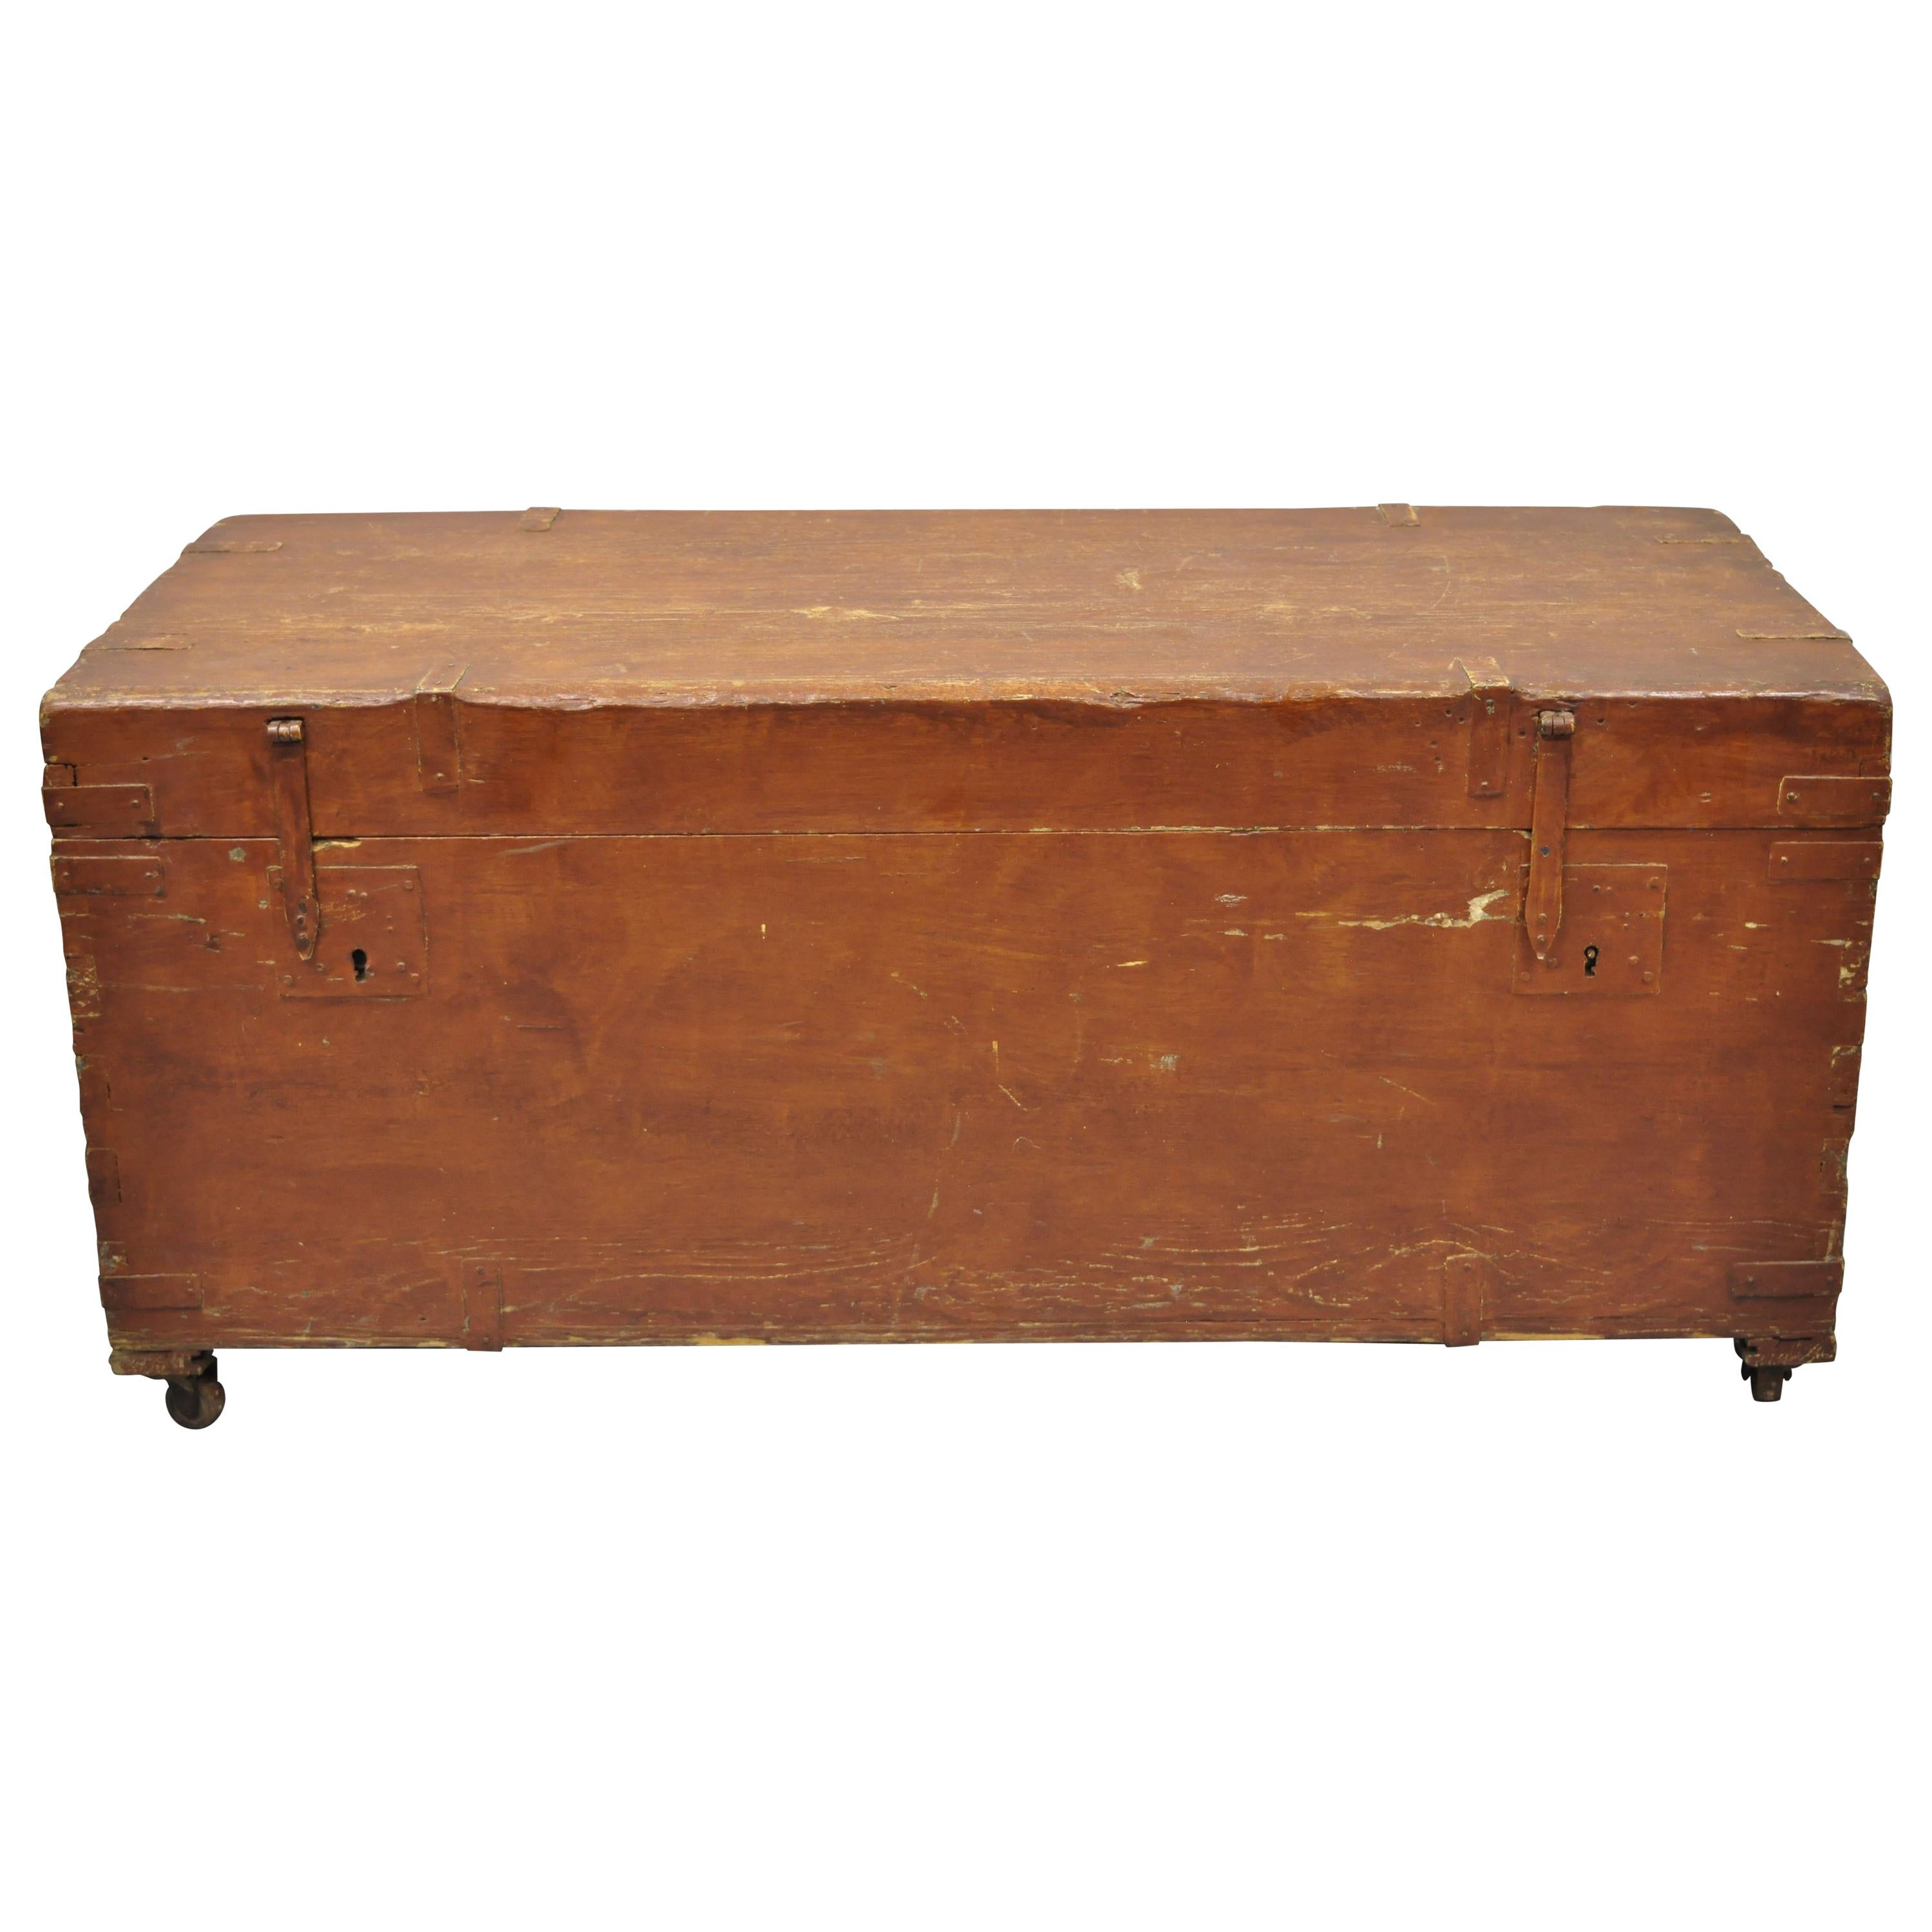 Antique Brown Distress Painted Pine Wood Dovetailed Blanket Chest Trunk For Sale